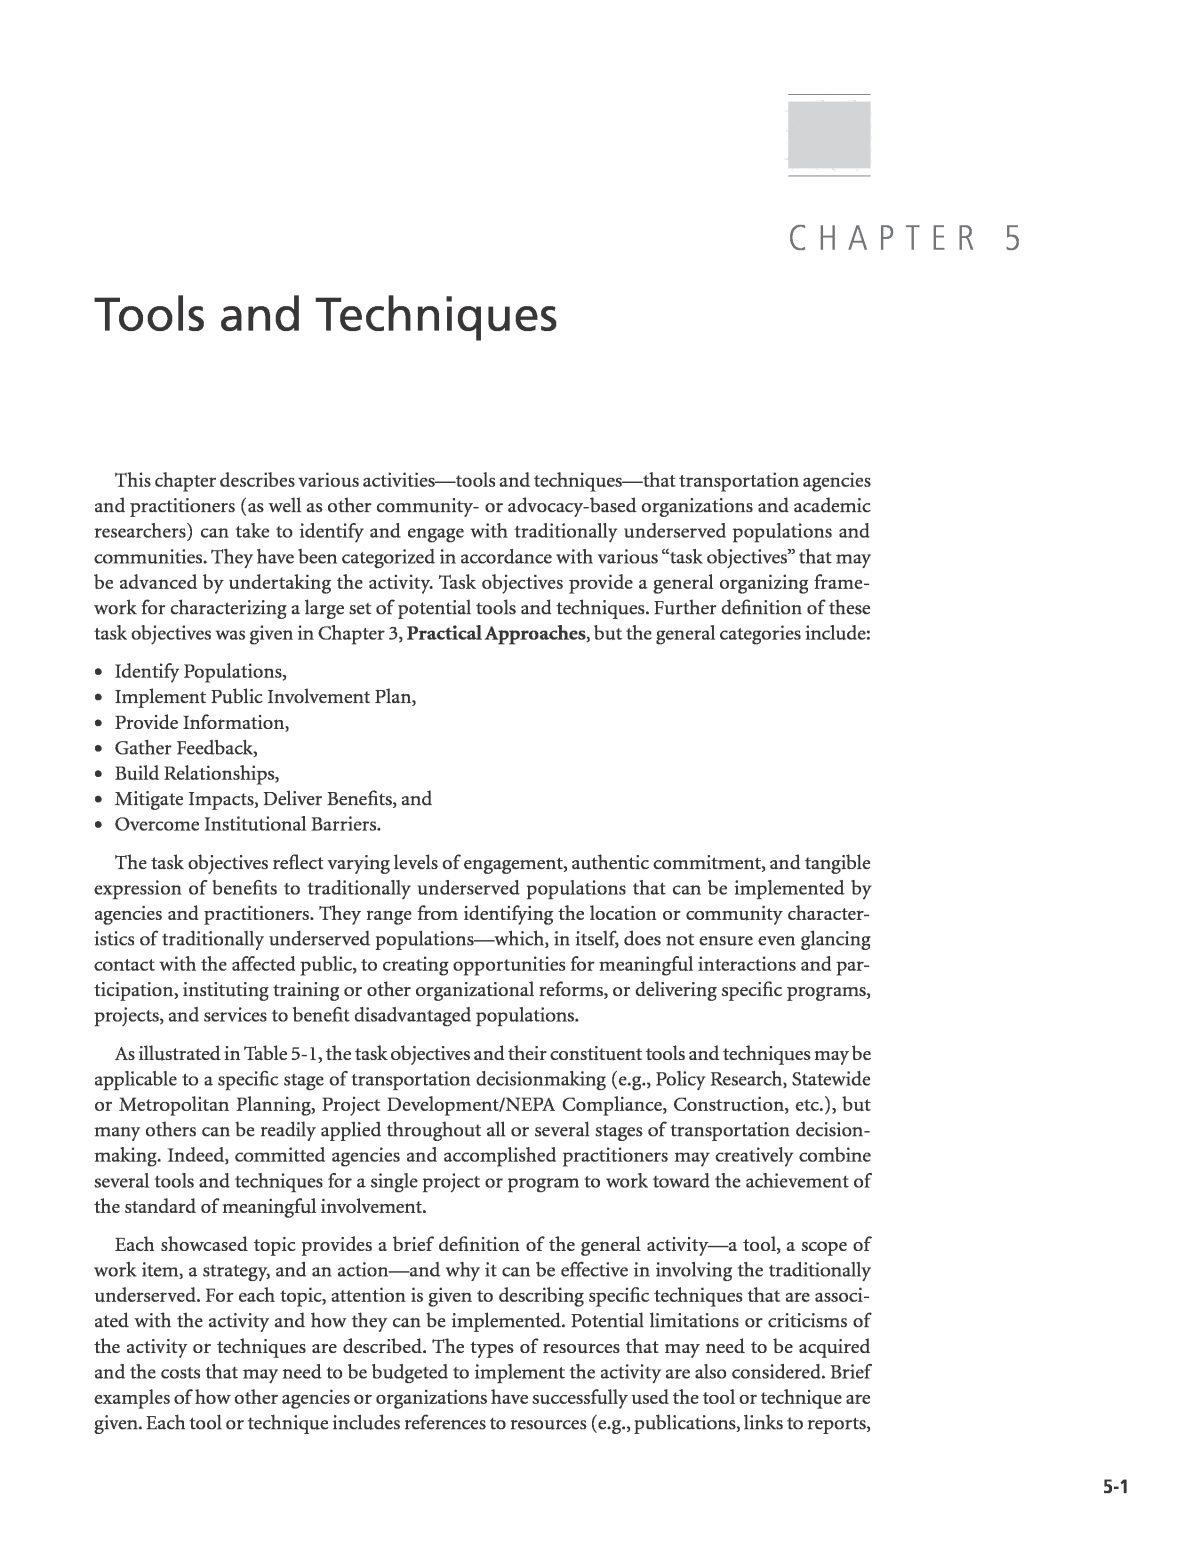 Chapter 5 - Tools and Techniques | Practical Approaches for